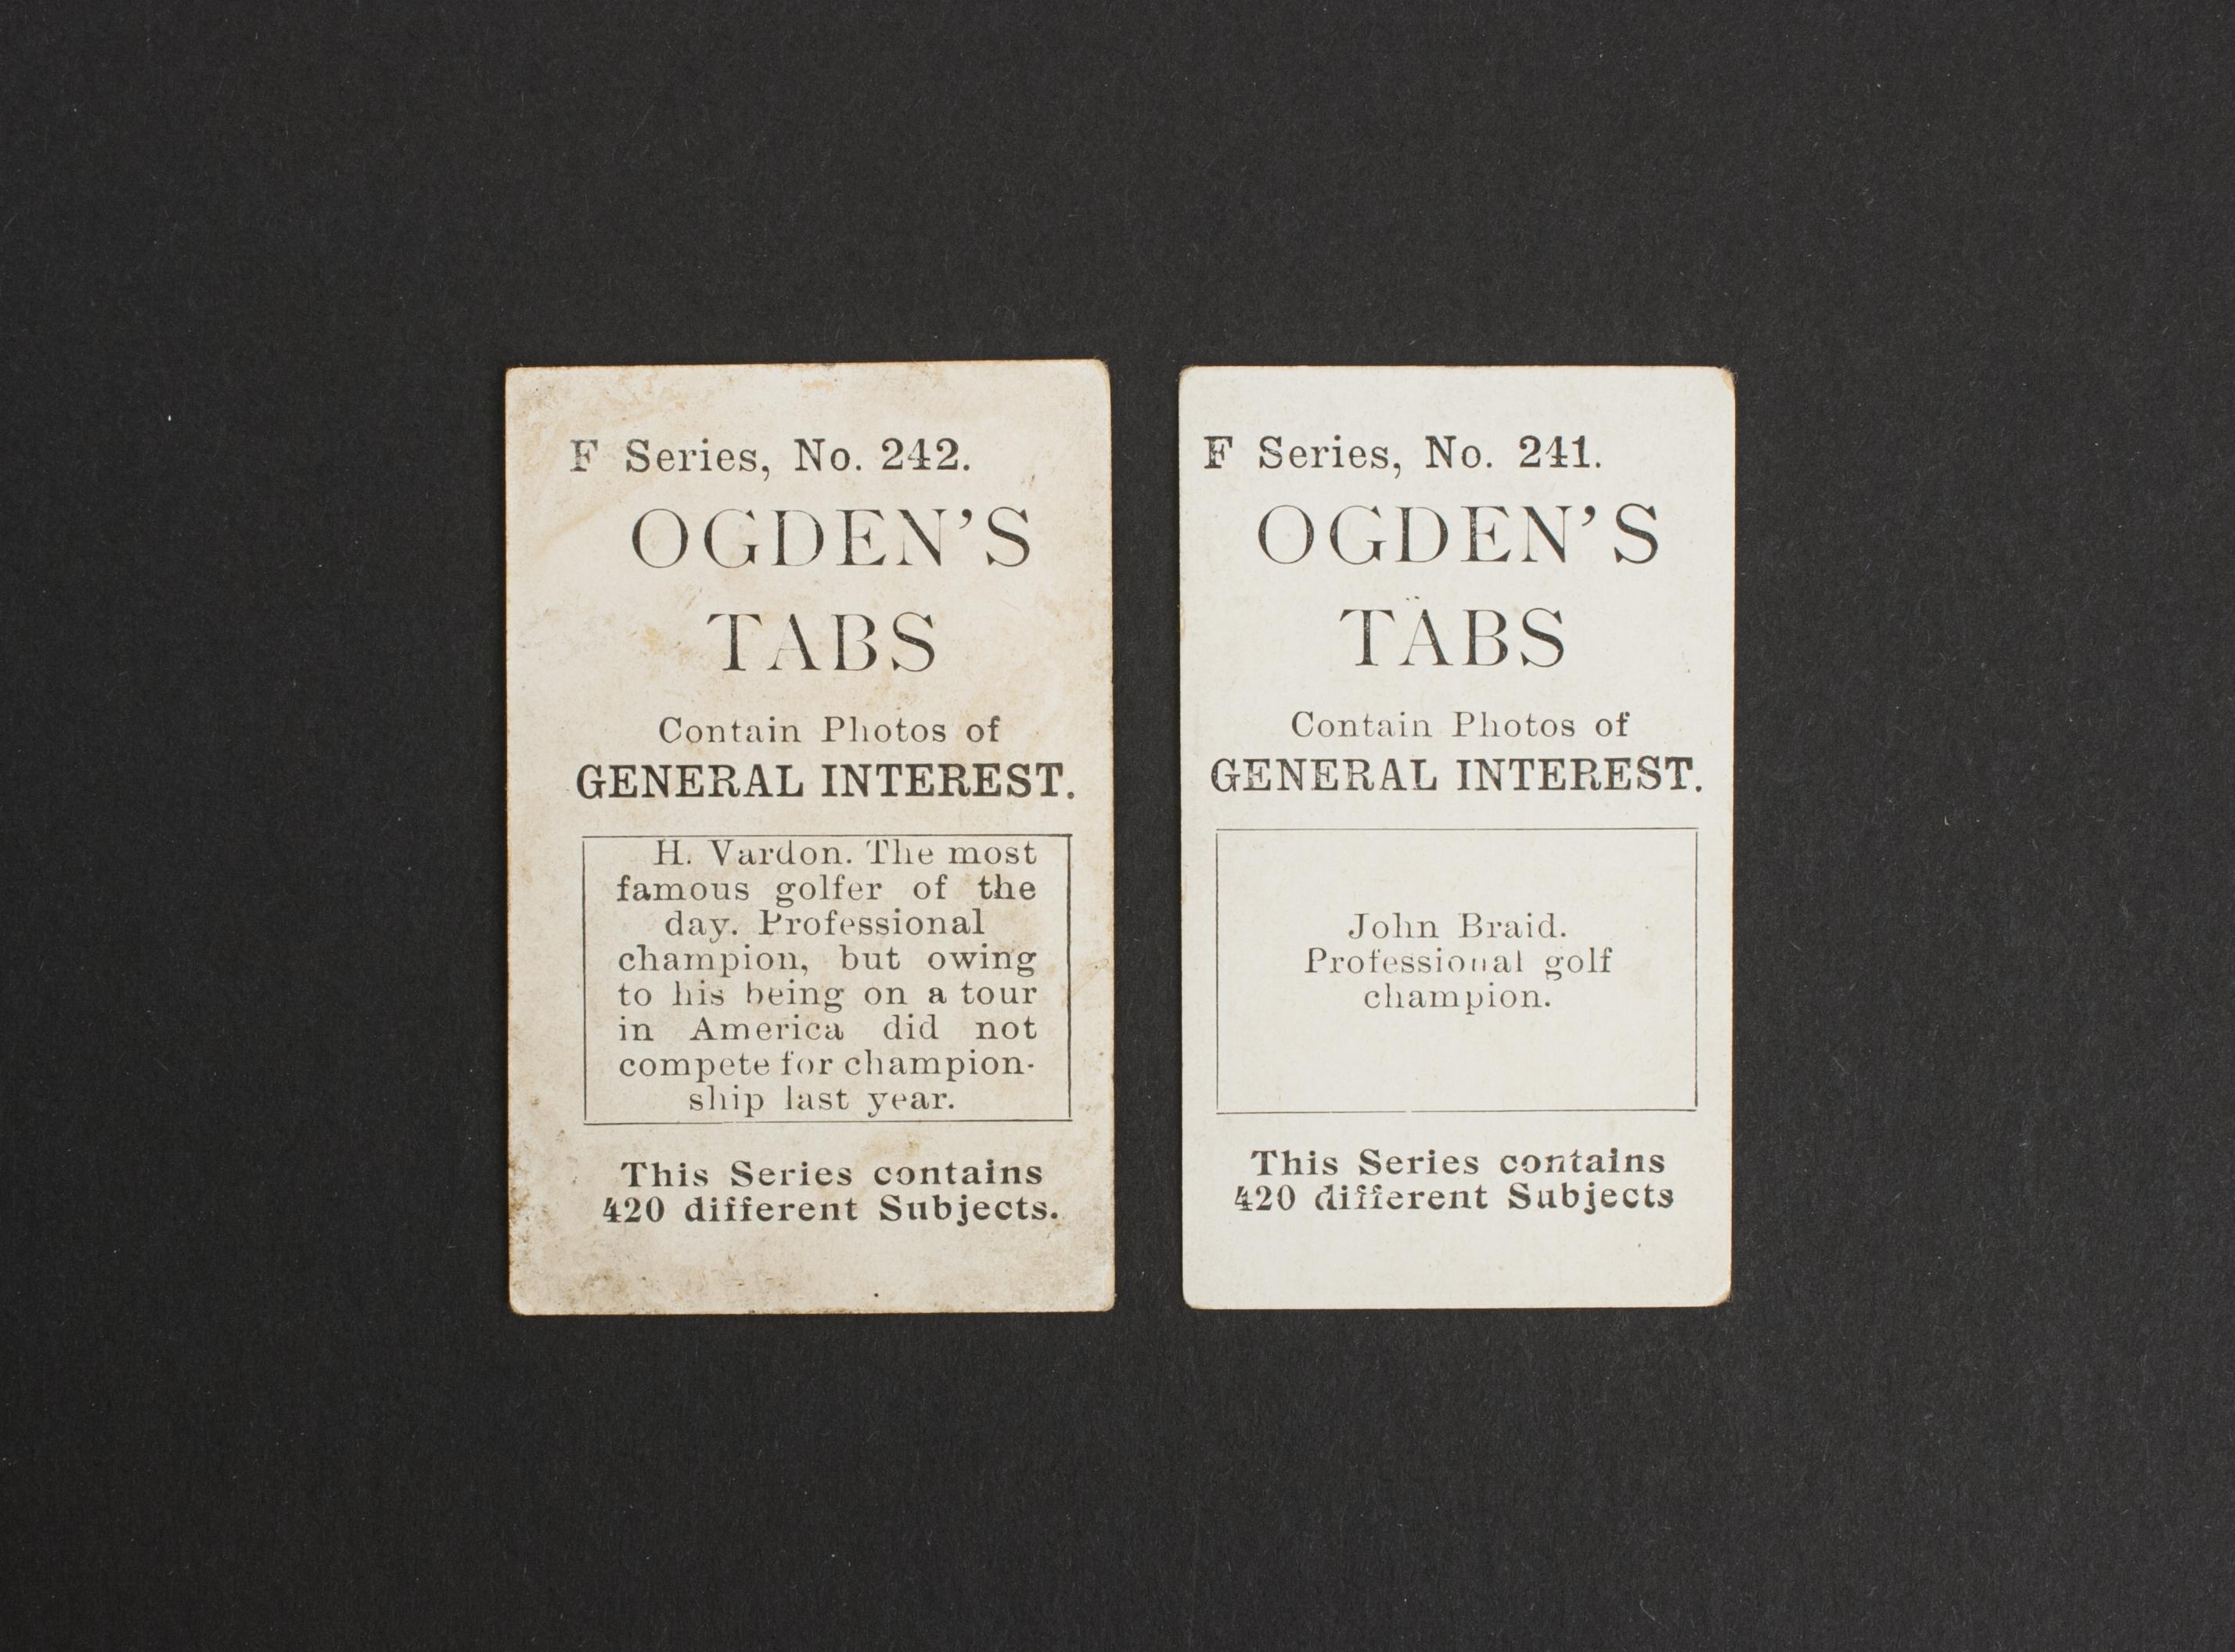 Ogden Tabs Golf Cigarette Cards.
The two 'Ogden's Cigarettes' cards show the Open Golf Champions of the past, 241 James (misspelt 'John') Braid and 242 Harry Vardon. The Ogden Tabs cards are 'F series, General Interest' which contained 420 different